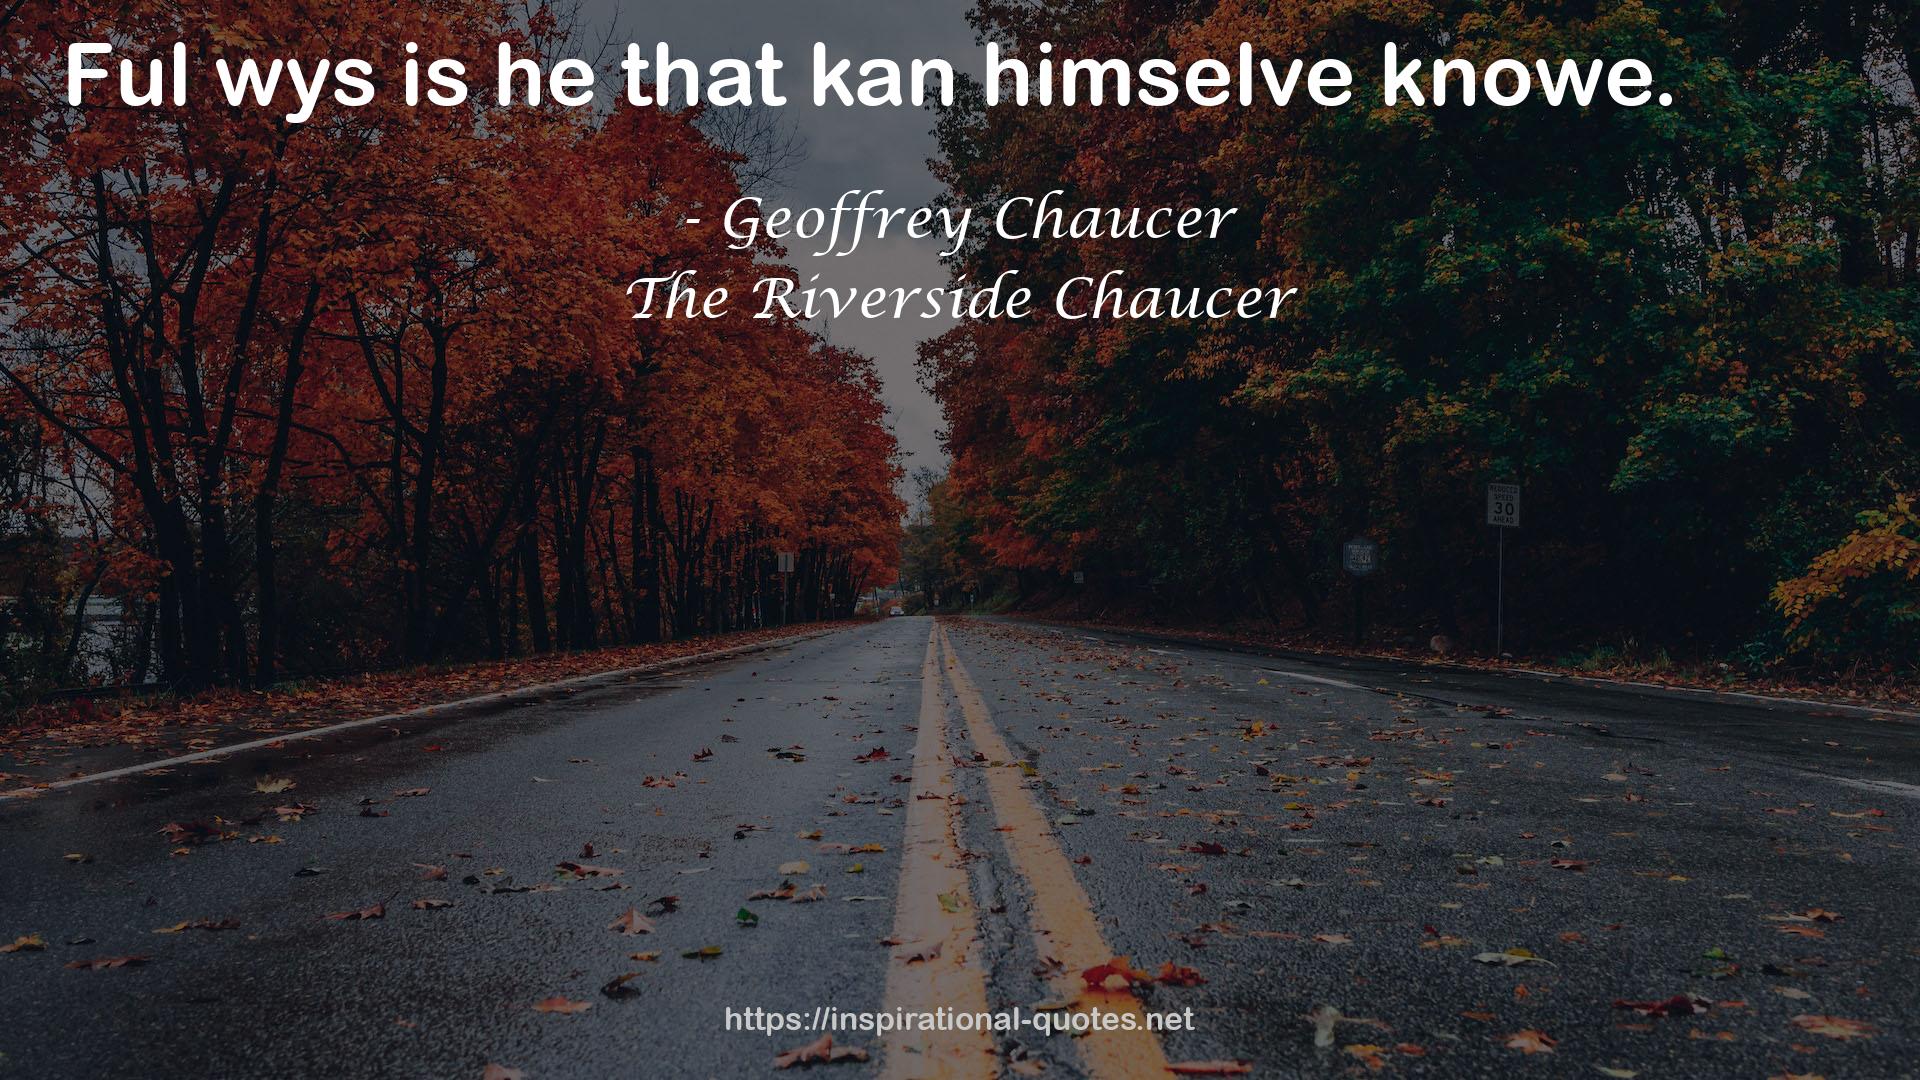 The Riverside Chaucer QUOTES